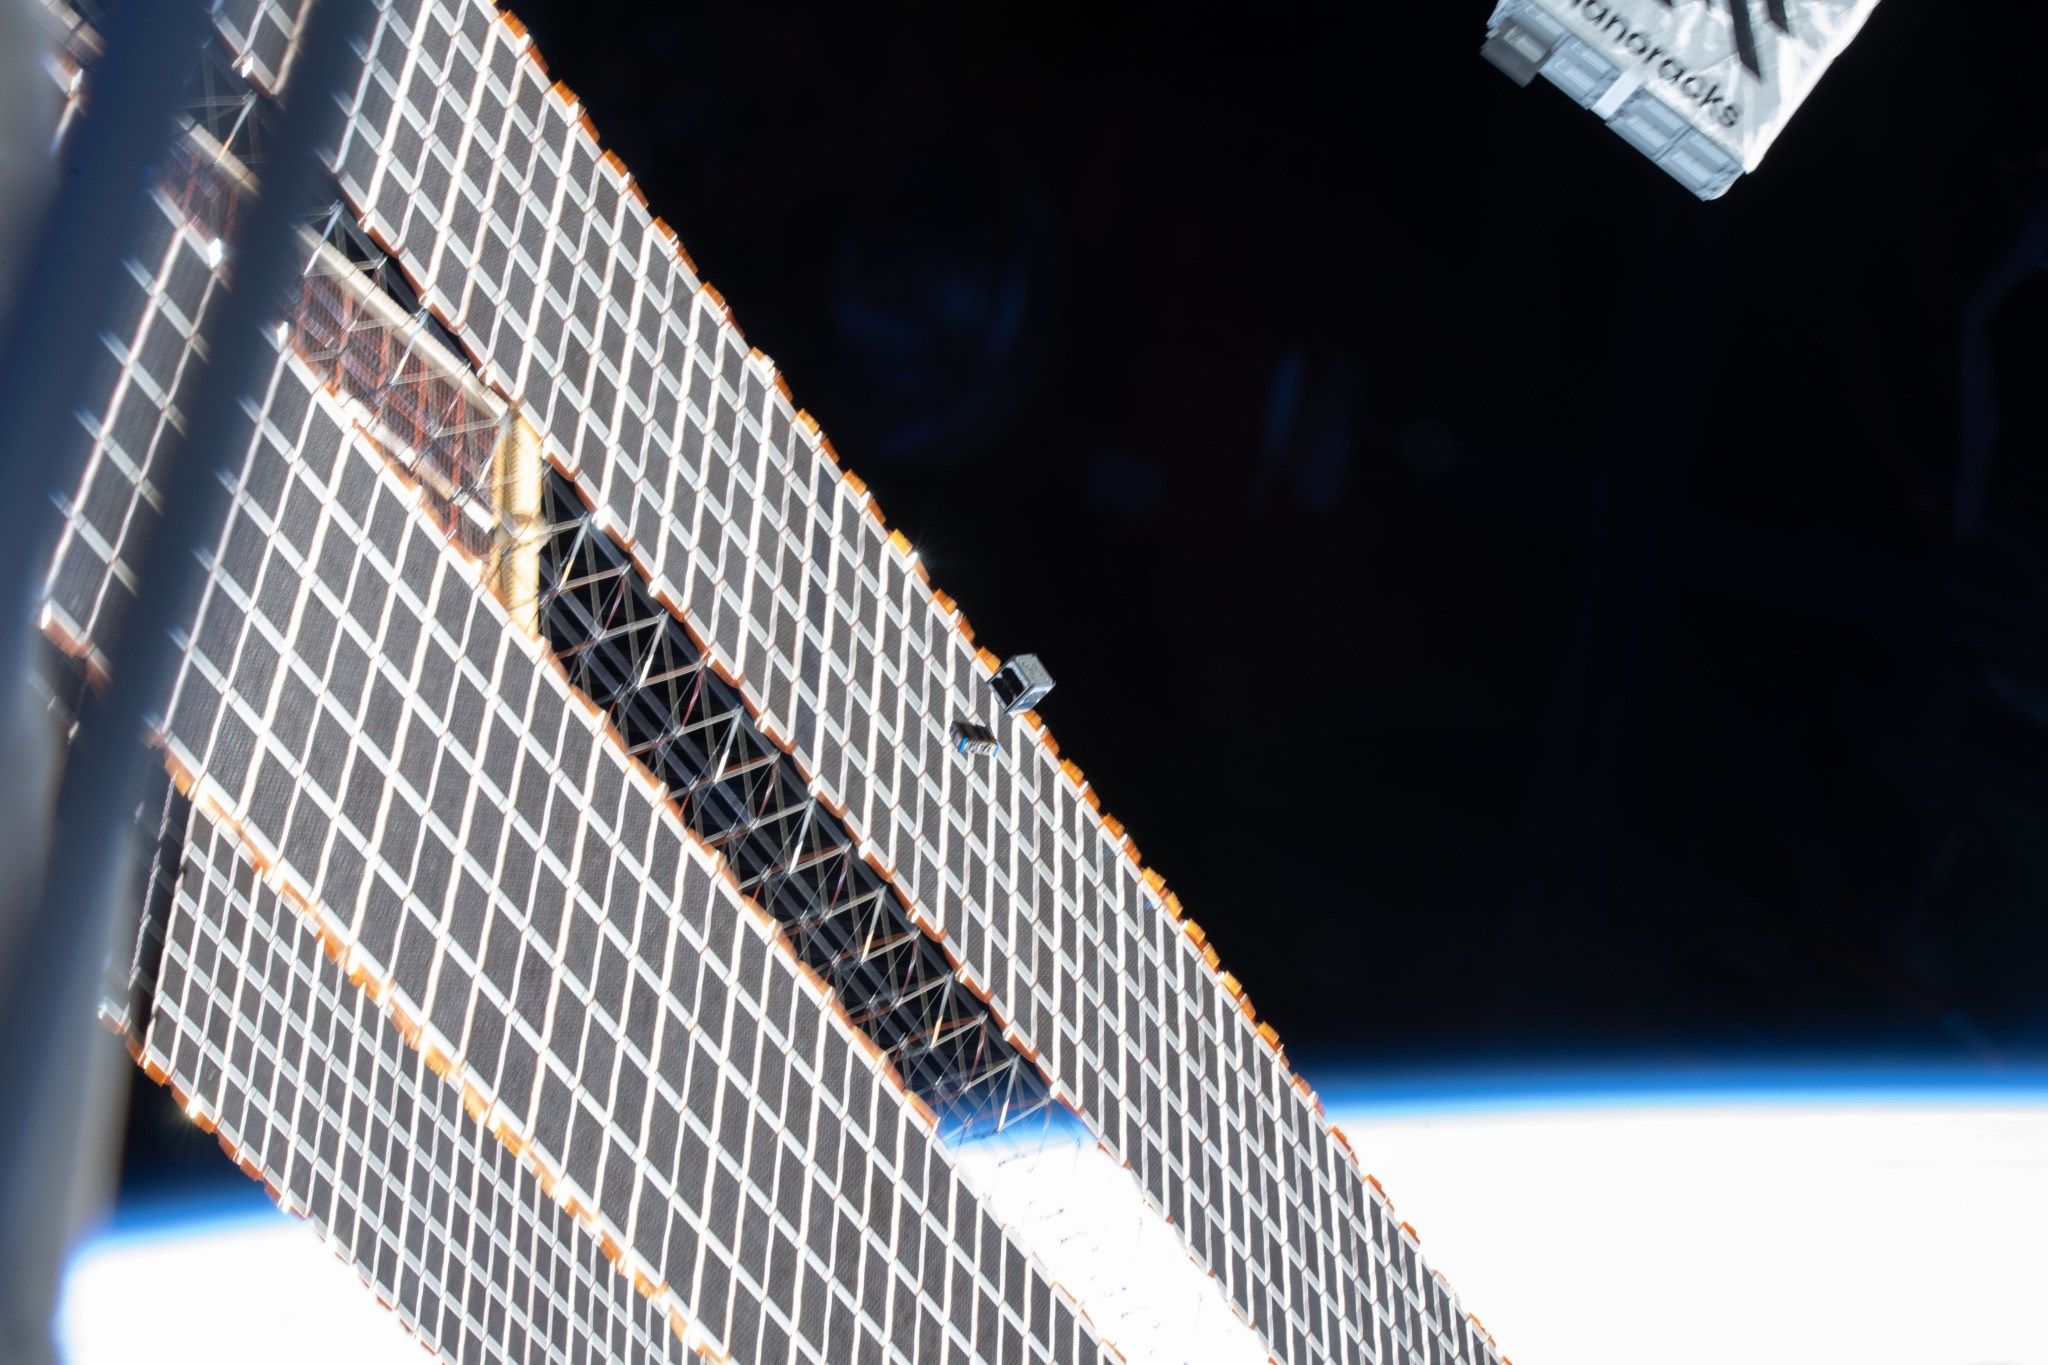 A CubeSat launched from the International Space Station.